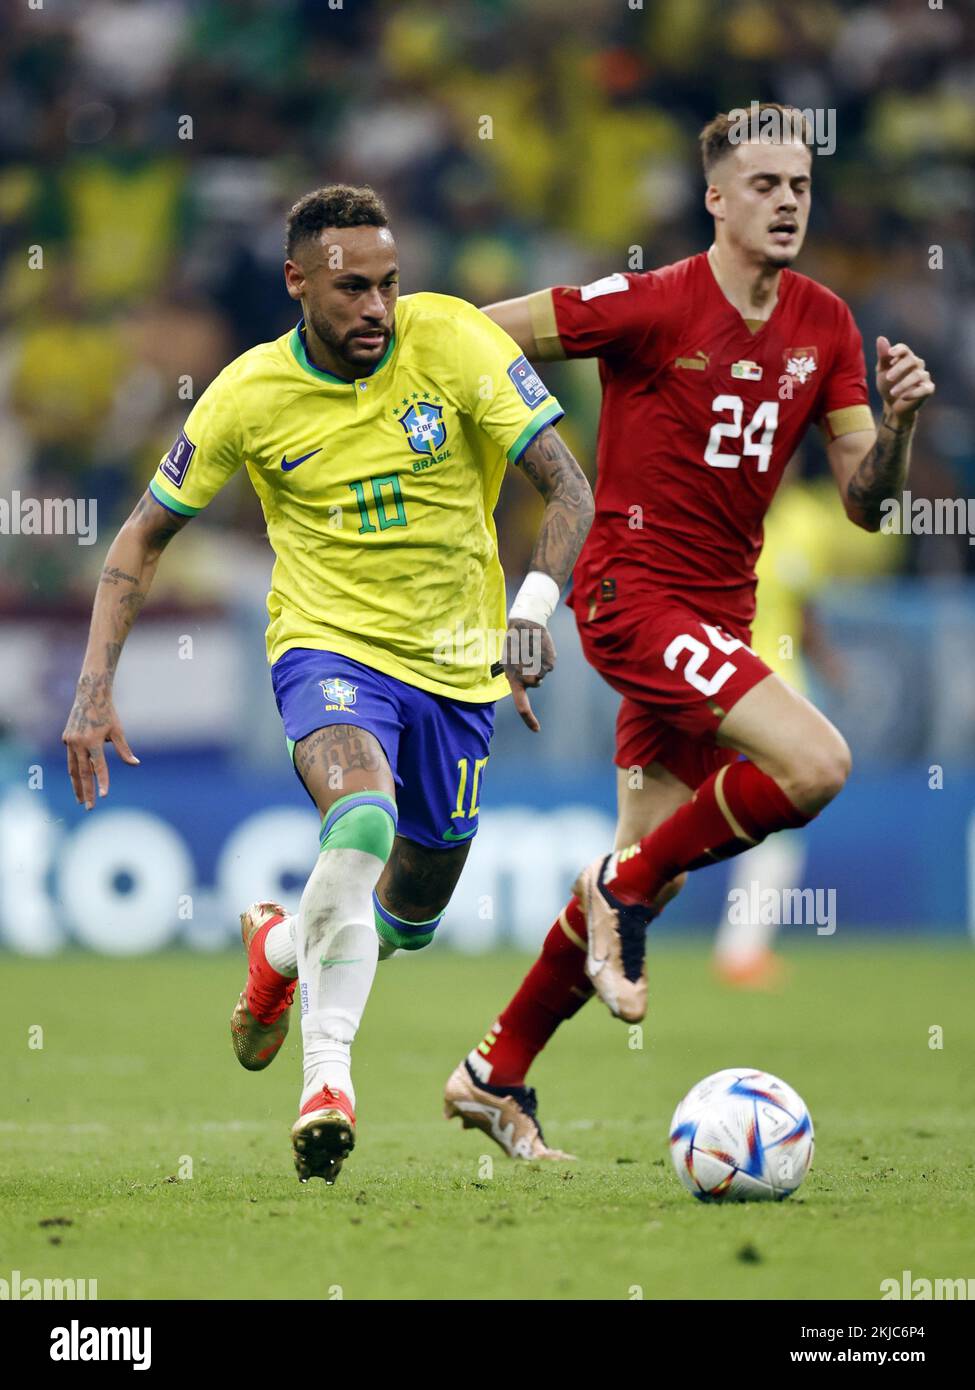 LUSAIL CITY - (l-r) Neymar of Brazil, Ivan Ilic of Serbia during the FIFA World Cup Qatar 2022 group G match between Brazil and Serbia at Lusail Stadium on November 24, 2022 in Lusail City, Qatar. AP | Dutch Height | MAURICE OF STONE Credit: ANP/Alamy Live News Stock Photo